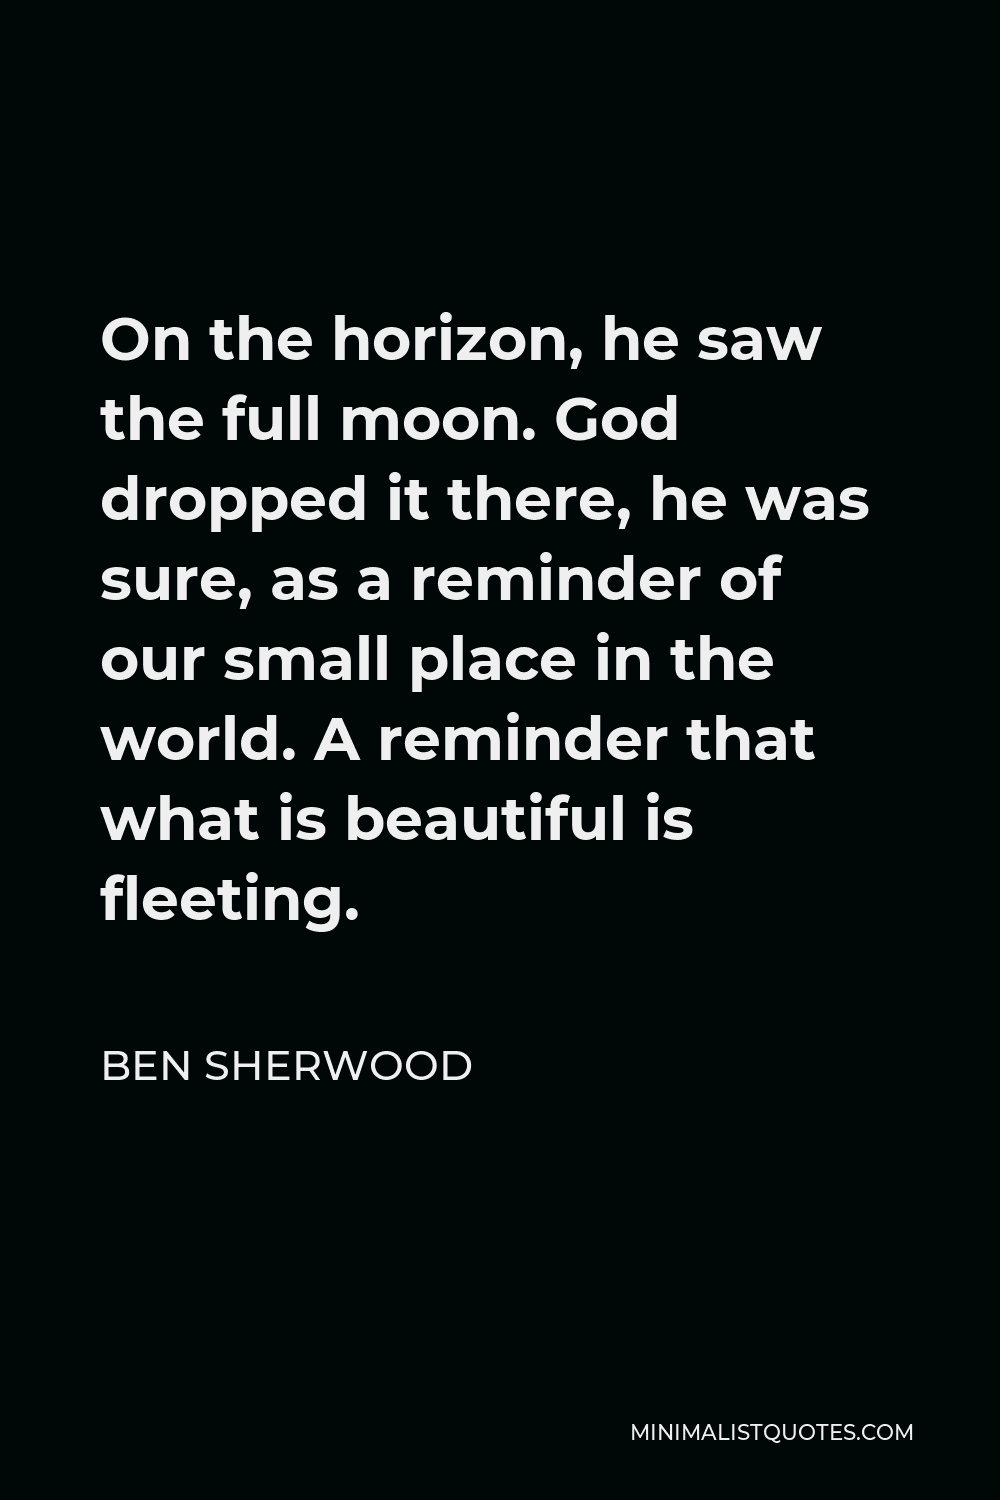 Ben Sherwood Quote - On the horizon, he saw the full moon. God dropped it there, he was sure, as a reminder of our small place in the world. A reminder that what is beautiful is fleeting.